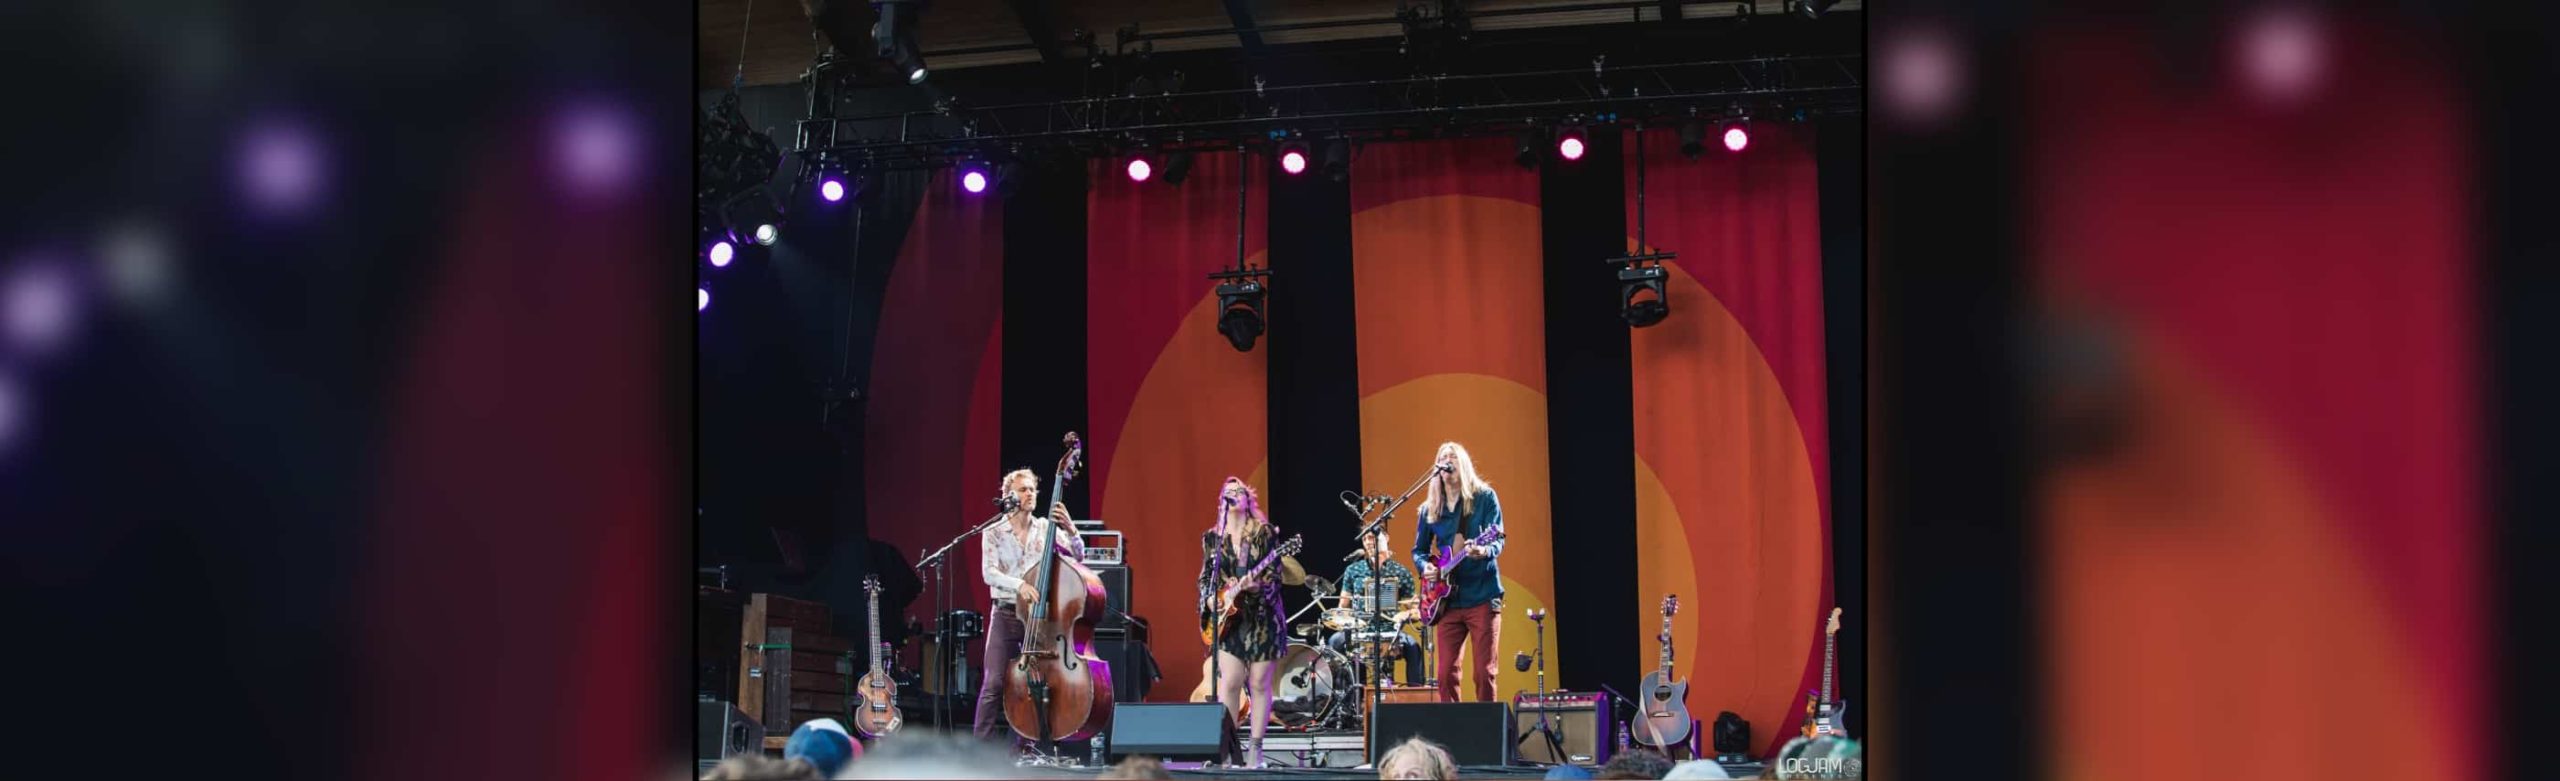 Listen Back: The Wood Brothers at KettleHouse Amphitheater in 2017 (Full Recording) Image